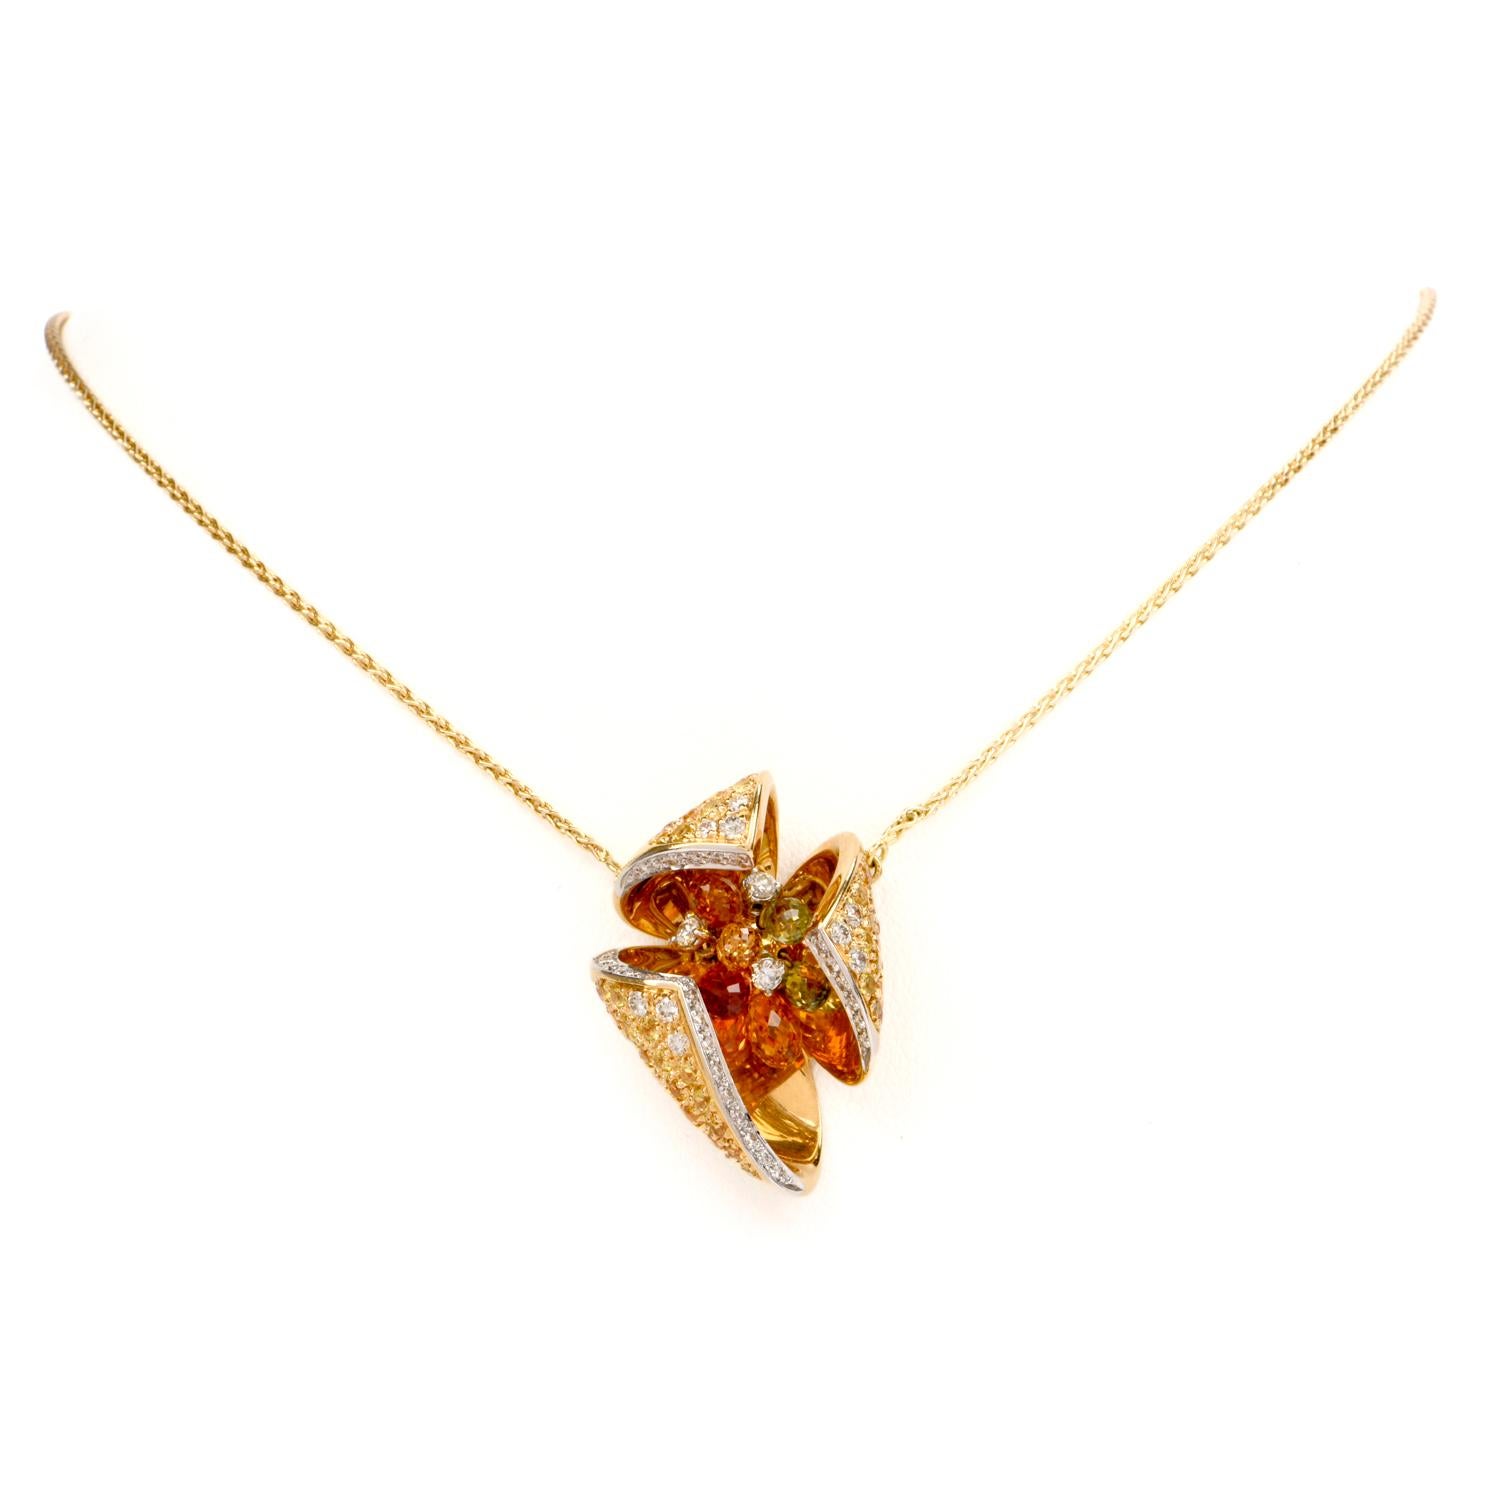 This limited-edition designer diamonds and yellow sapphires pendant necklace are crafted in 18-karat yellow gold, weighing 19.4 grams and measuring 16.50 inches long. Necklace pendant simulate three petal flowerheads, the inner edges of the ‘petals’